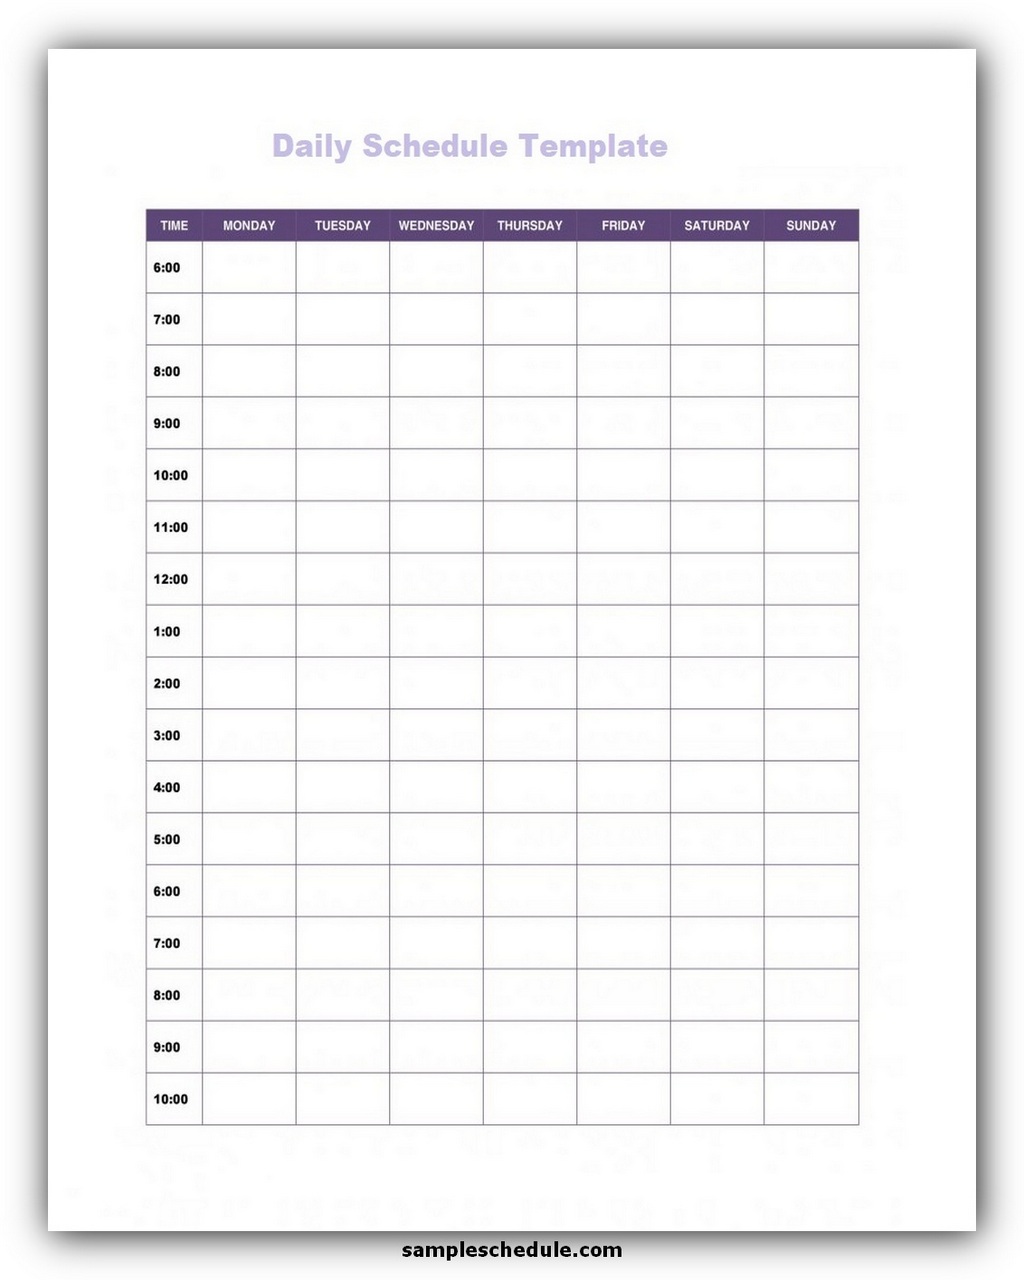 11+ Daily Schedule Template Excel Free sample schedule